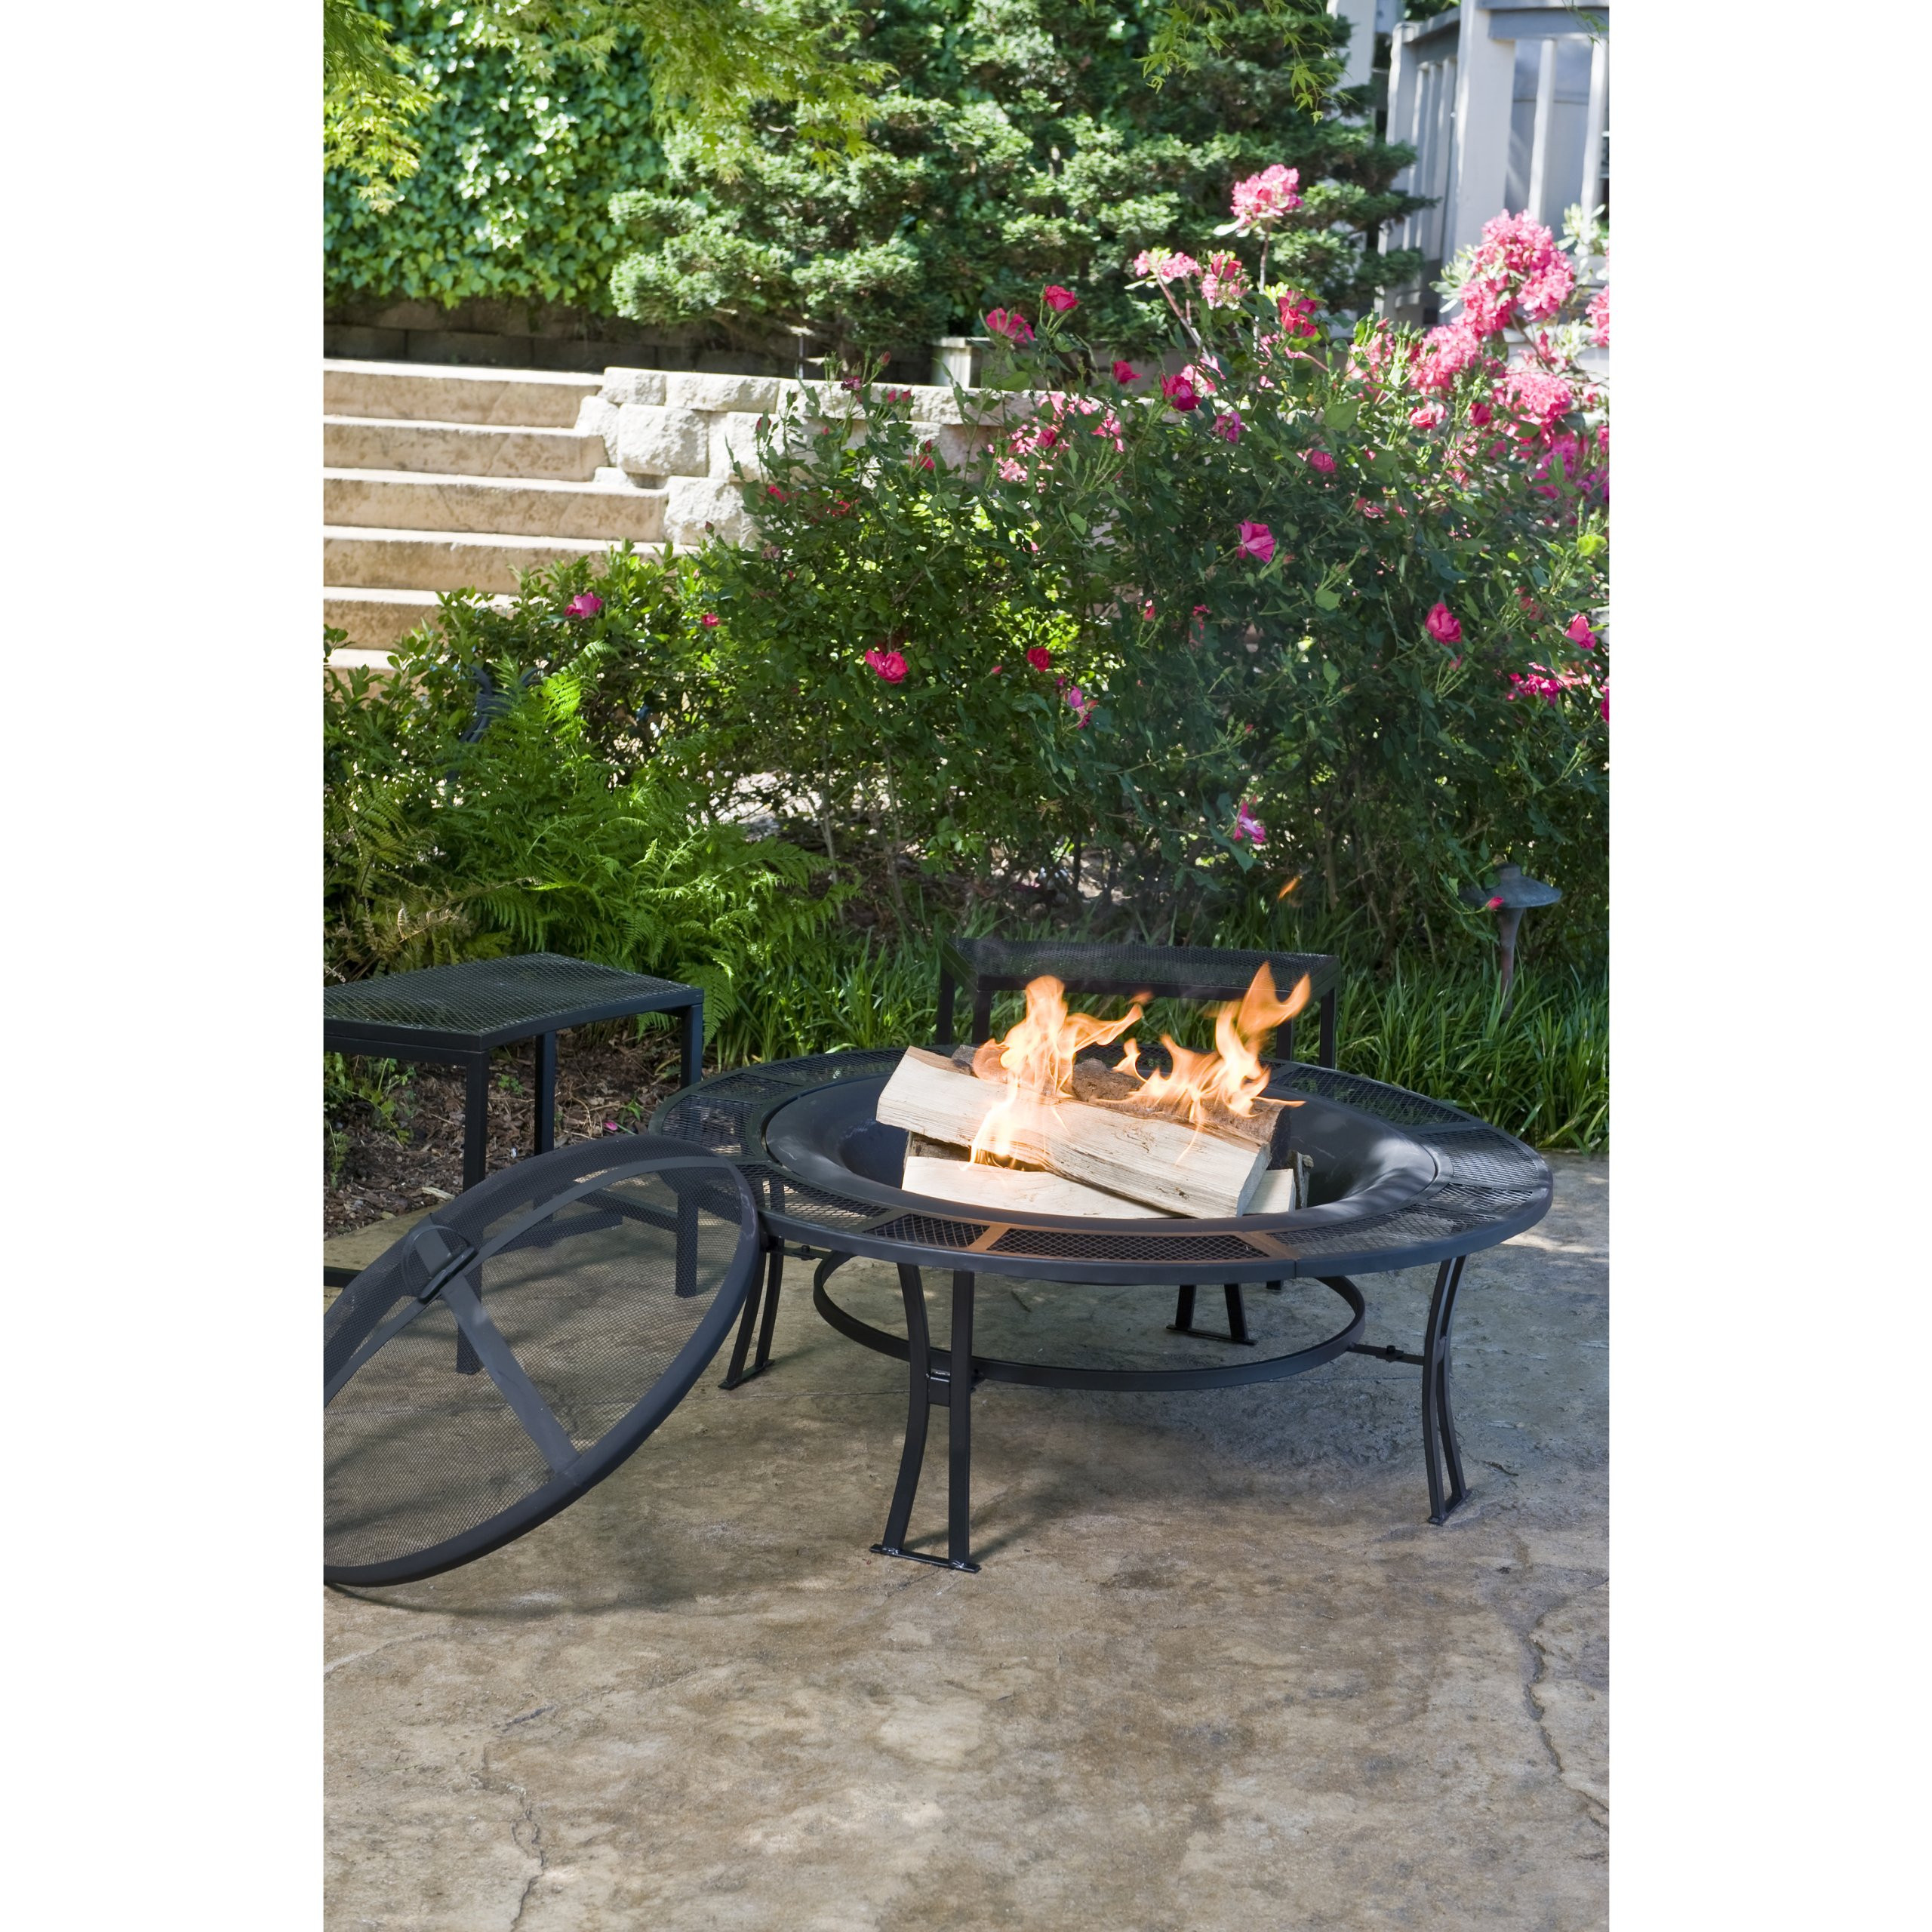 Mesh Firepit Covers
 CobraCo Steel Mesh Rim Fire Pit and Two Bench Set with